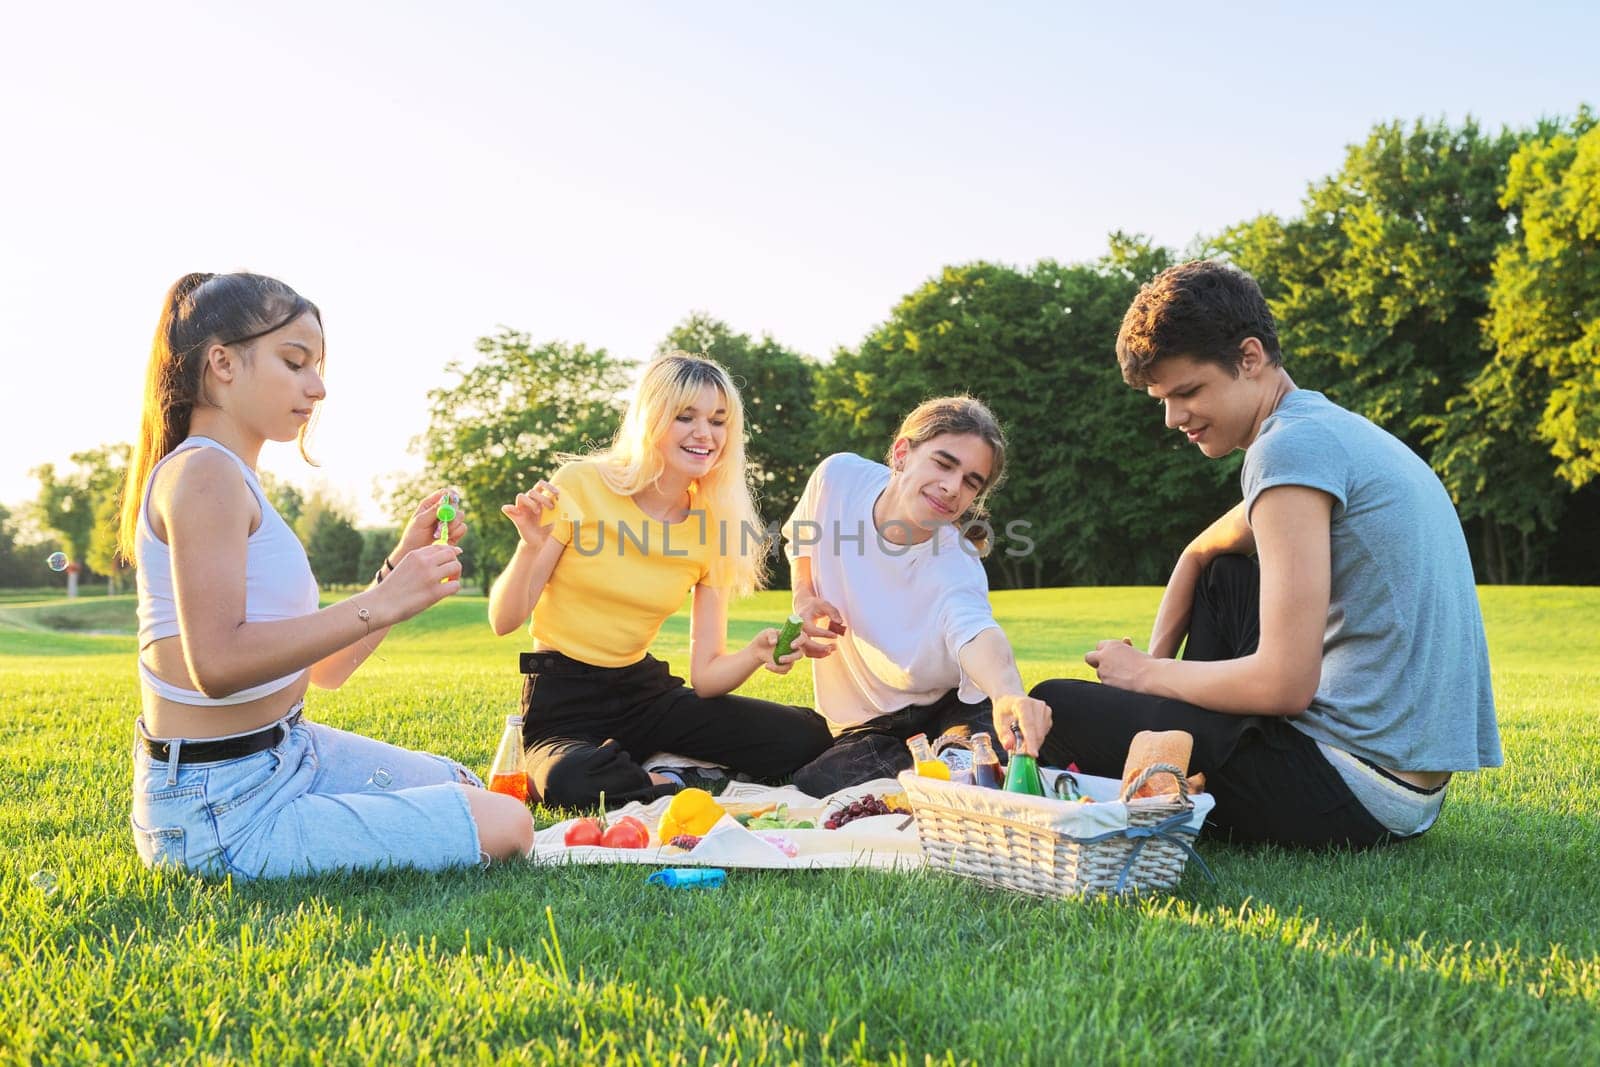 Teenagers having fun on a picnic in the park on lawn by VH-studio